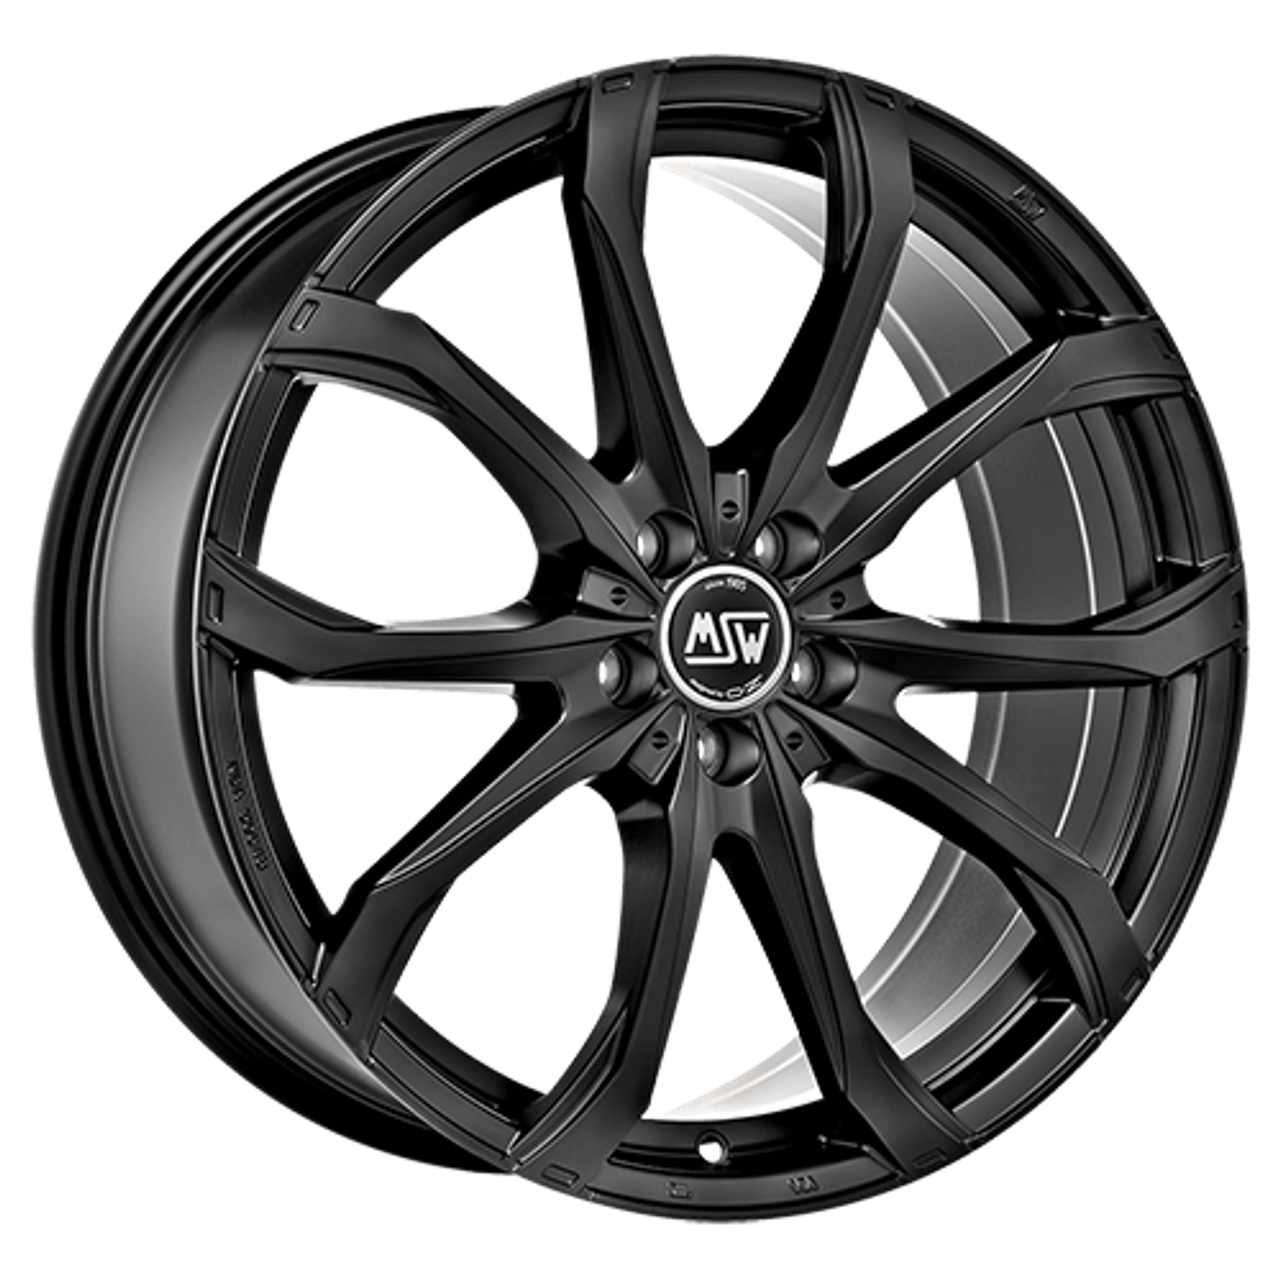 MSW (OZ) MSW 48 gloss black full polished 9.5Jx20 5x112 ET33